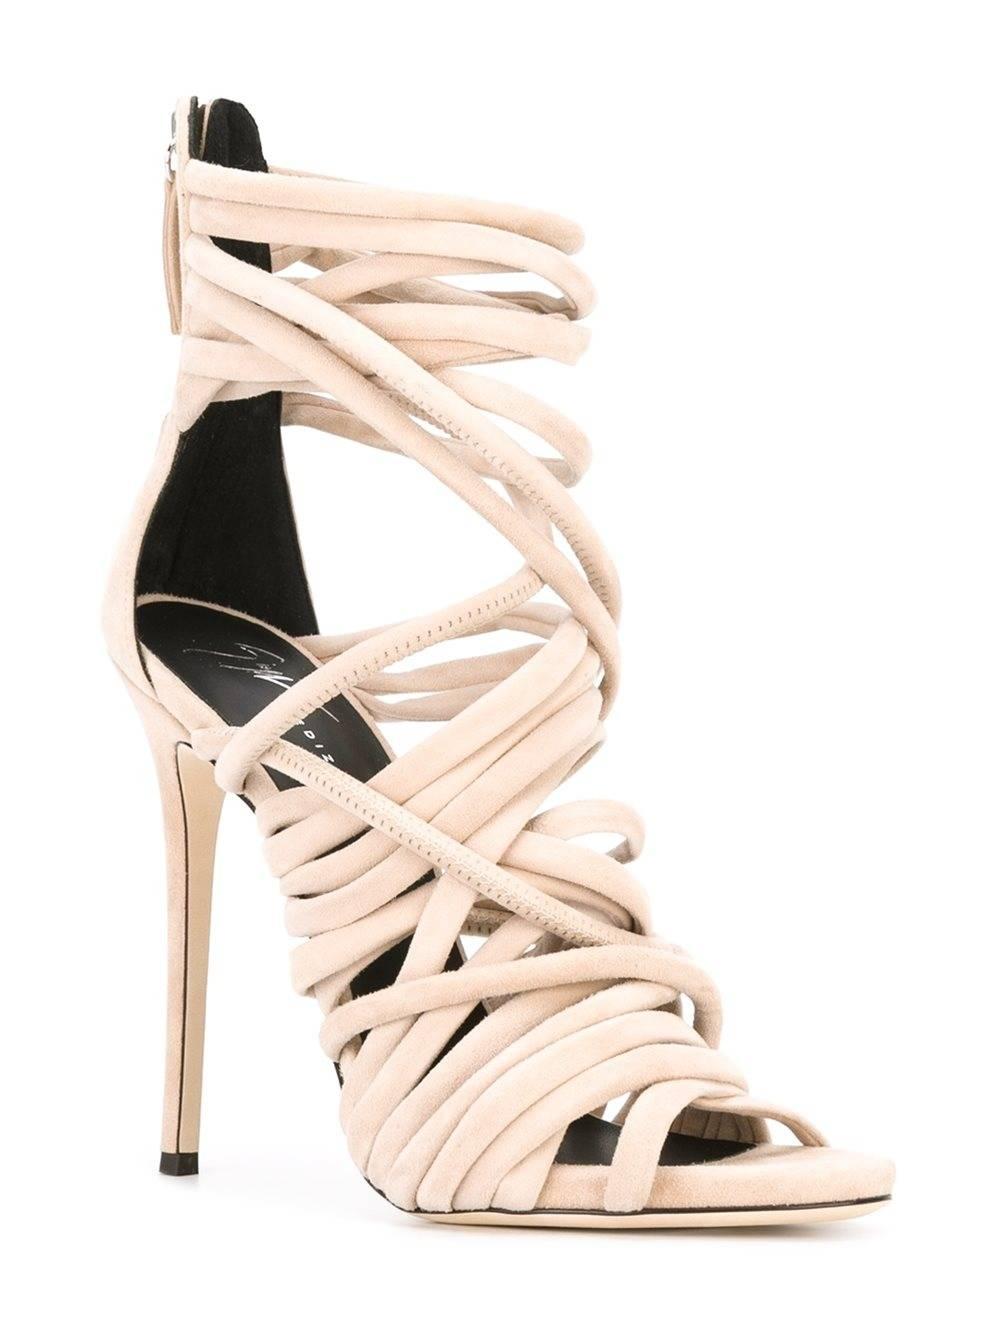 CURATOR'S NOTES  

Giuseppe Zanotti New Nude Suede Leather Strappy Heels in Box   

Size IT 36 
Suede Leather
Zipper closure 
Made in Italy 
Heel height 5